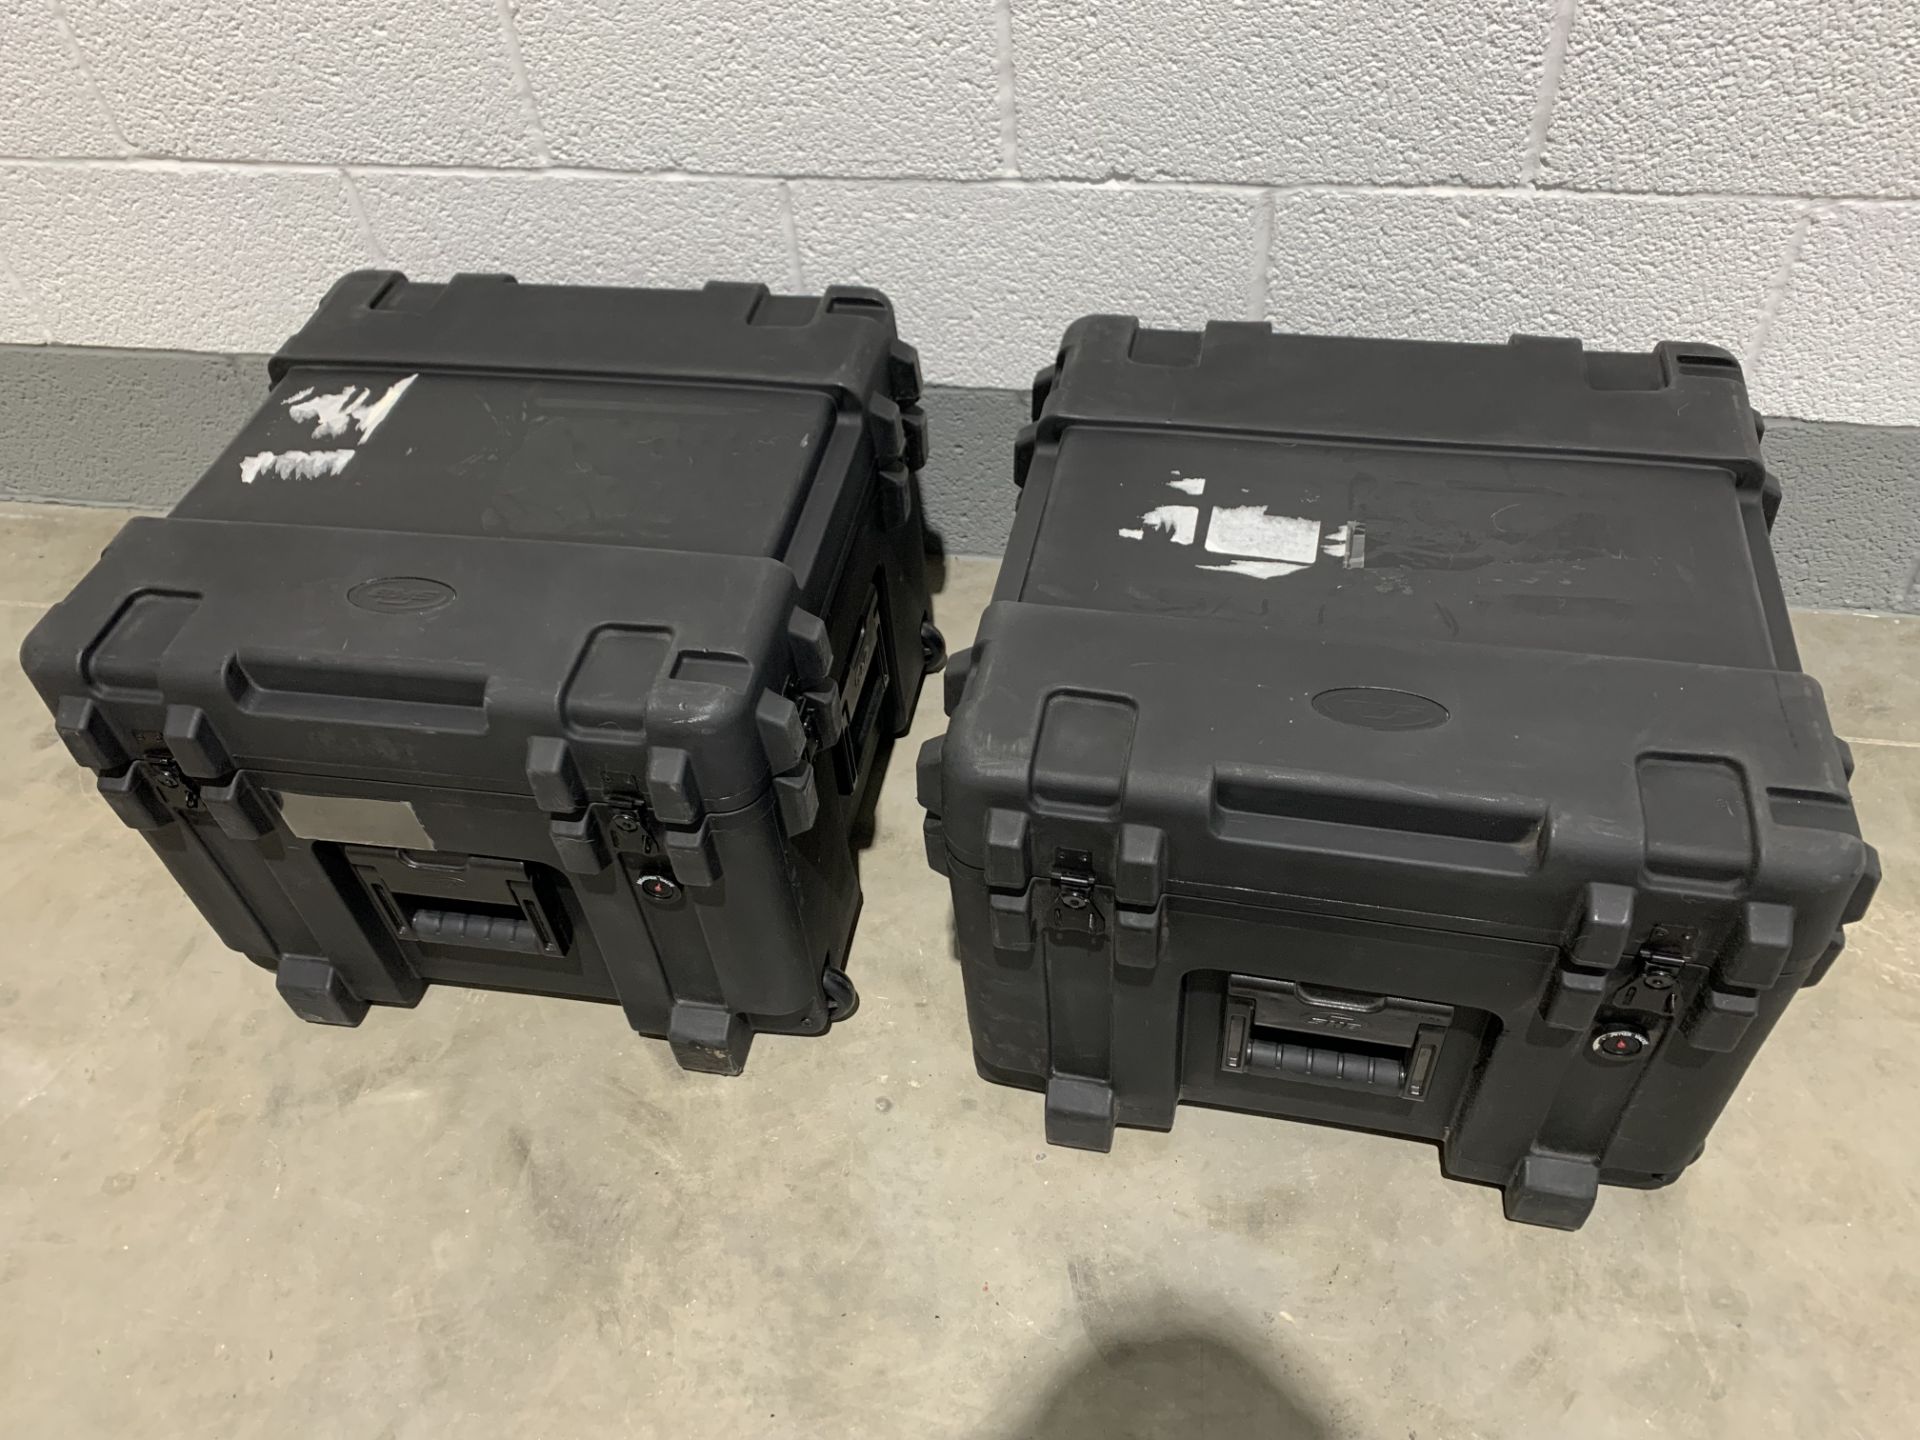 2x SKB R Series 1919-14 Waterproof Utility Case Roto Moulded Condition: Ex-Hire Solid cases. With